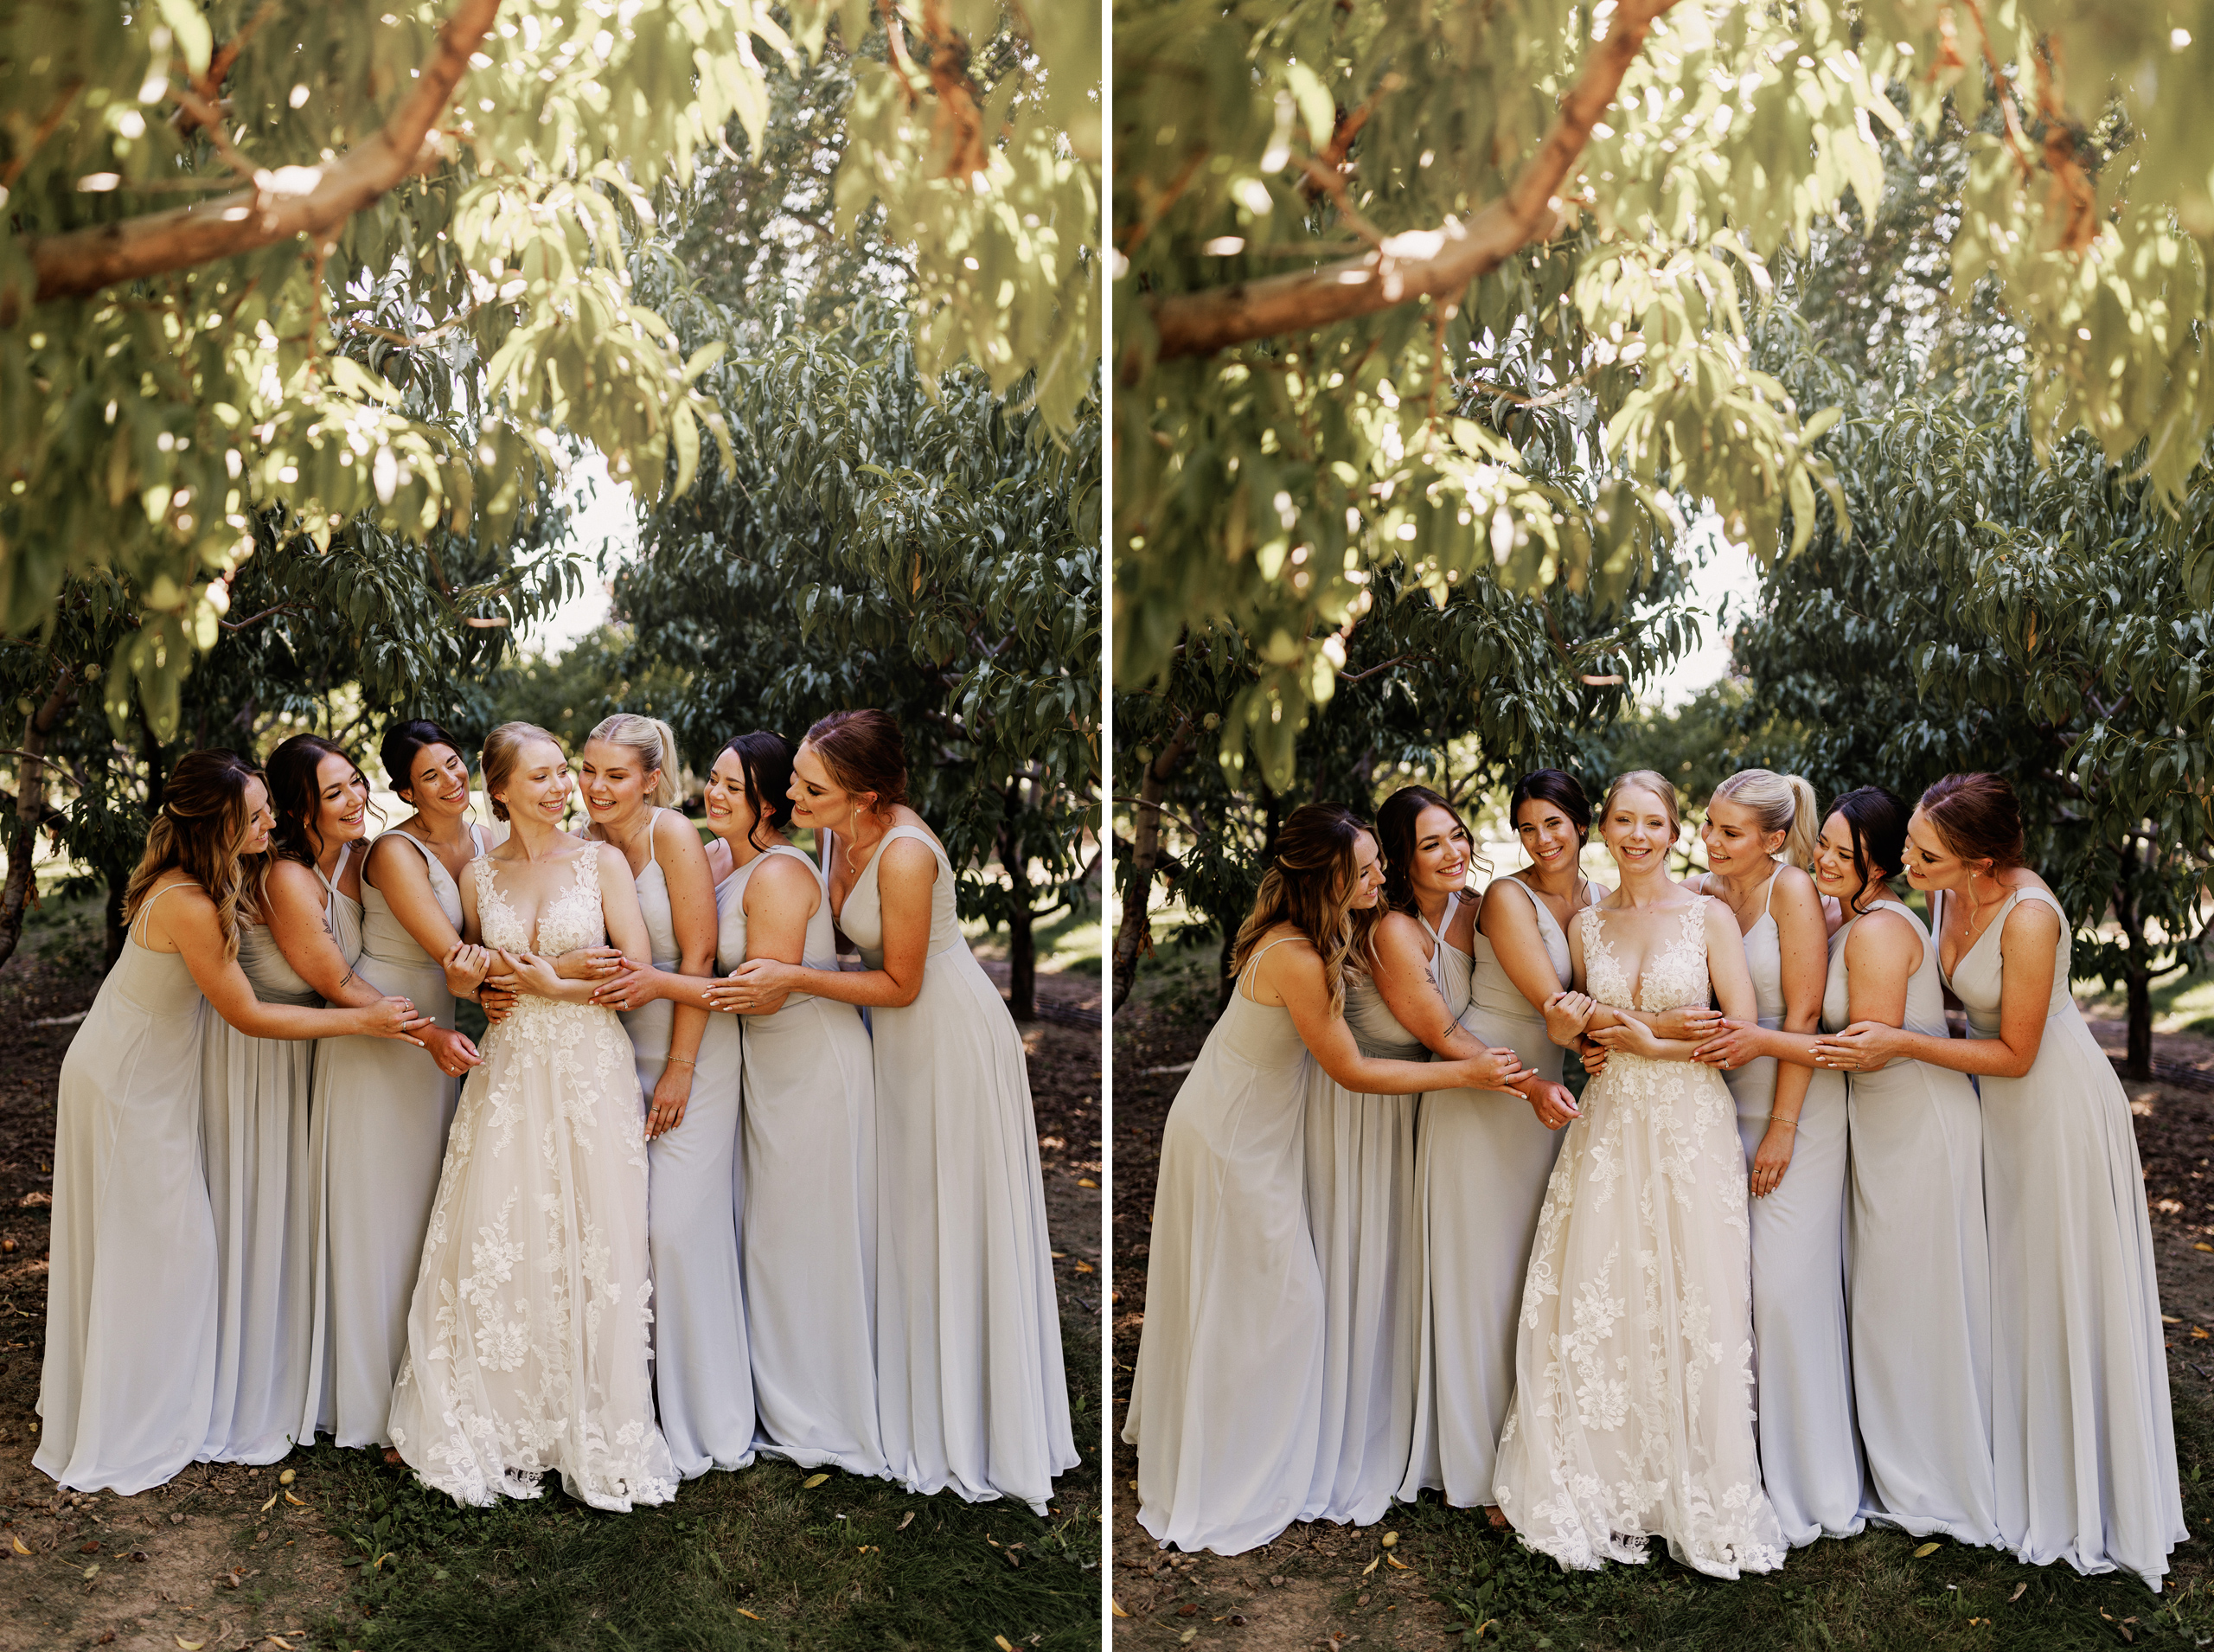 bridemaids group photo apple orchard wedding photography afterglow